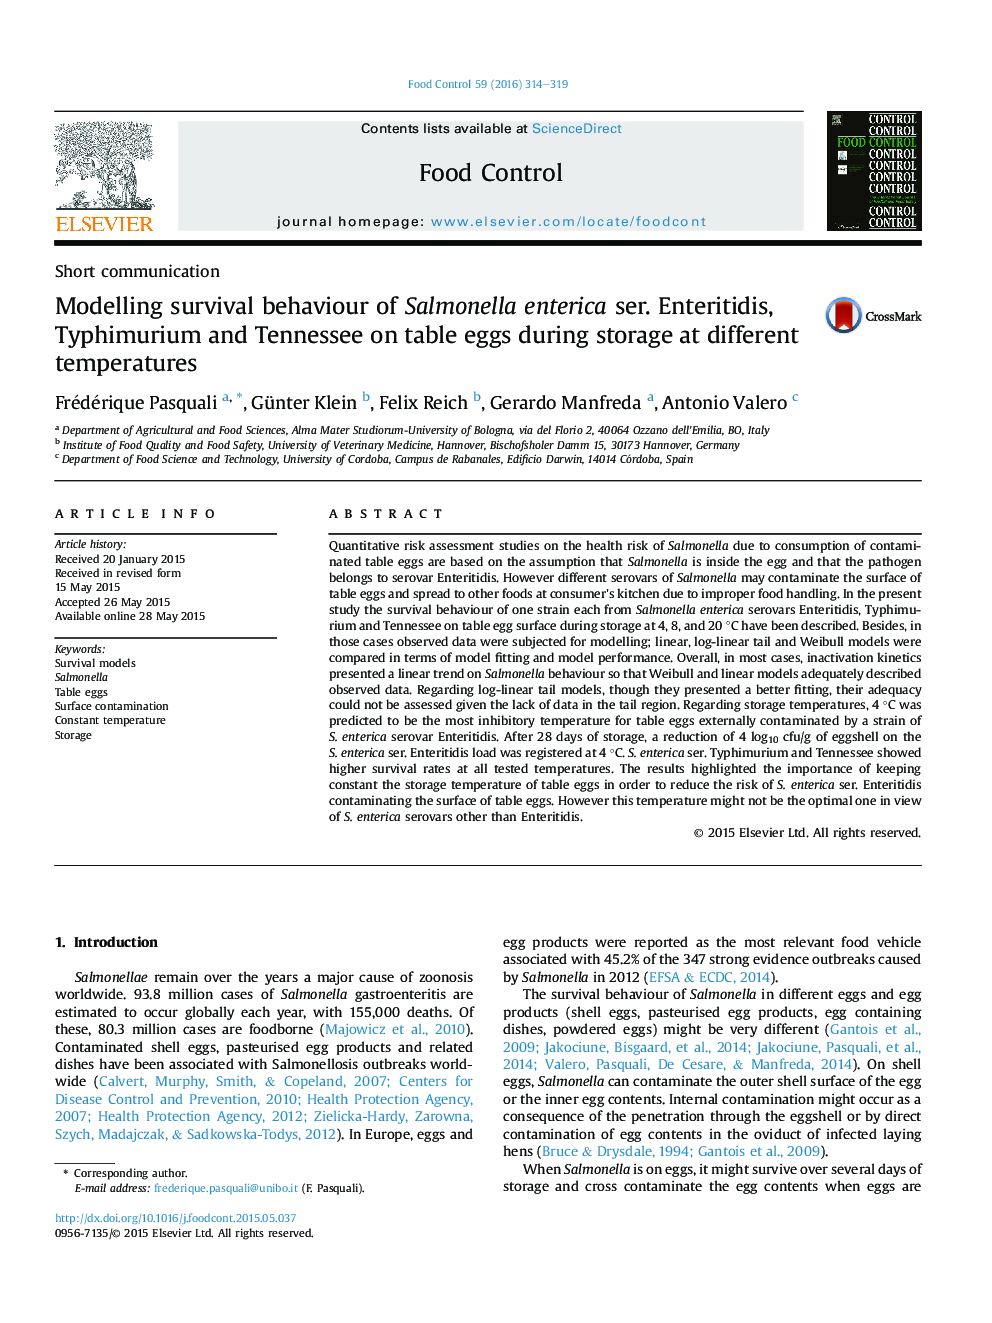 Short communicationModelling survival behaviour of Salmonella enterica ser. Enteritidis, Typhimurium and Tennessee on table eggs during storage at different temperatures